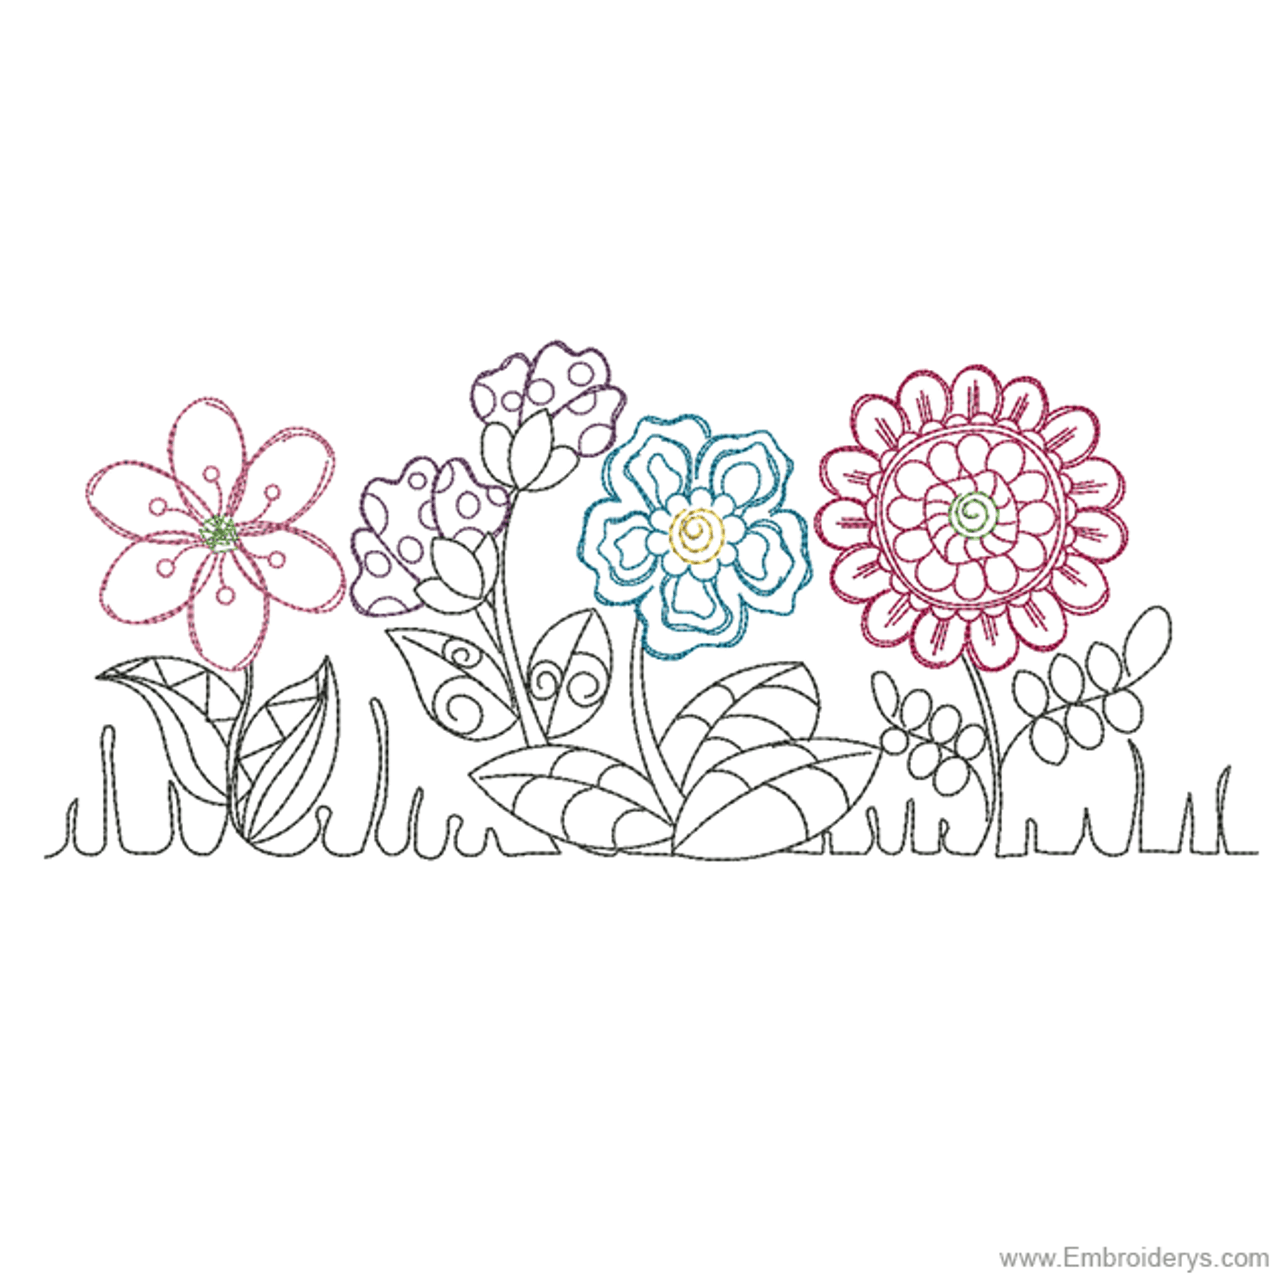 https://cdn11.bigcommerce.com/s-8cn80vpmse/images/stencil/1280x1280/products/115/576/TSE00082M-Four-Fanciful-Flowers-Border__70264.1651678021.png?c=2